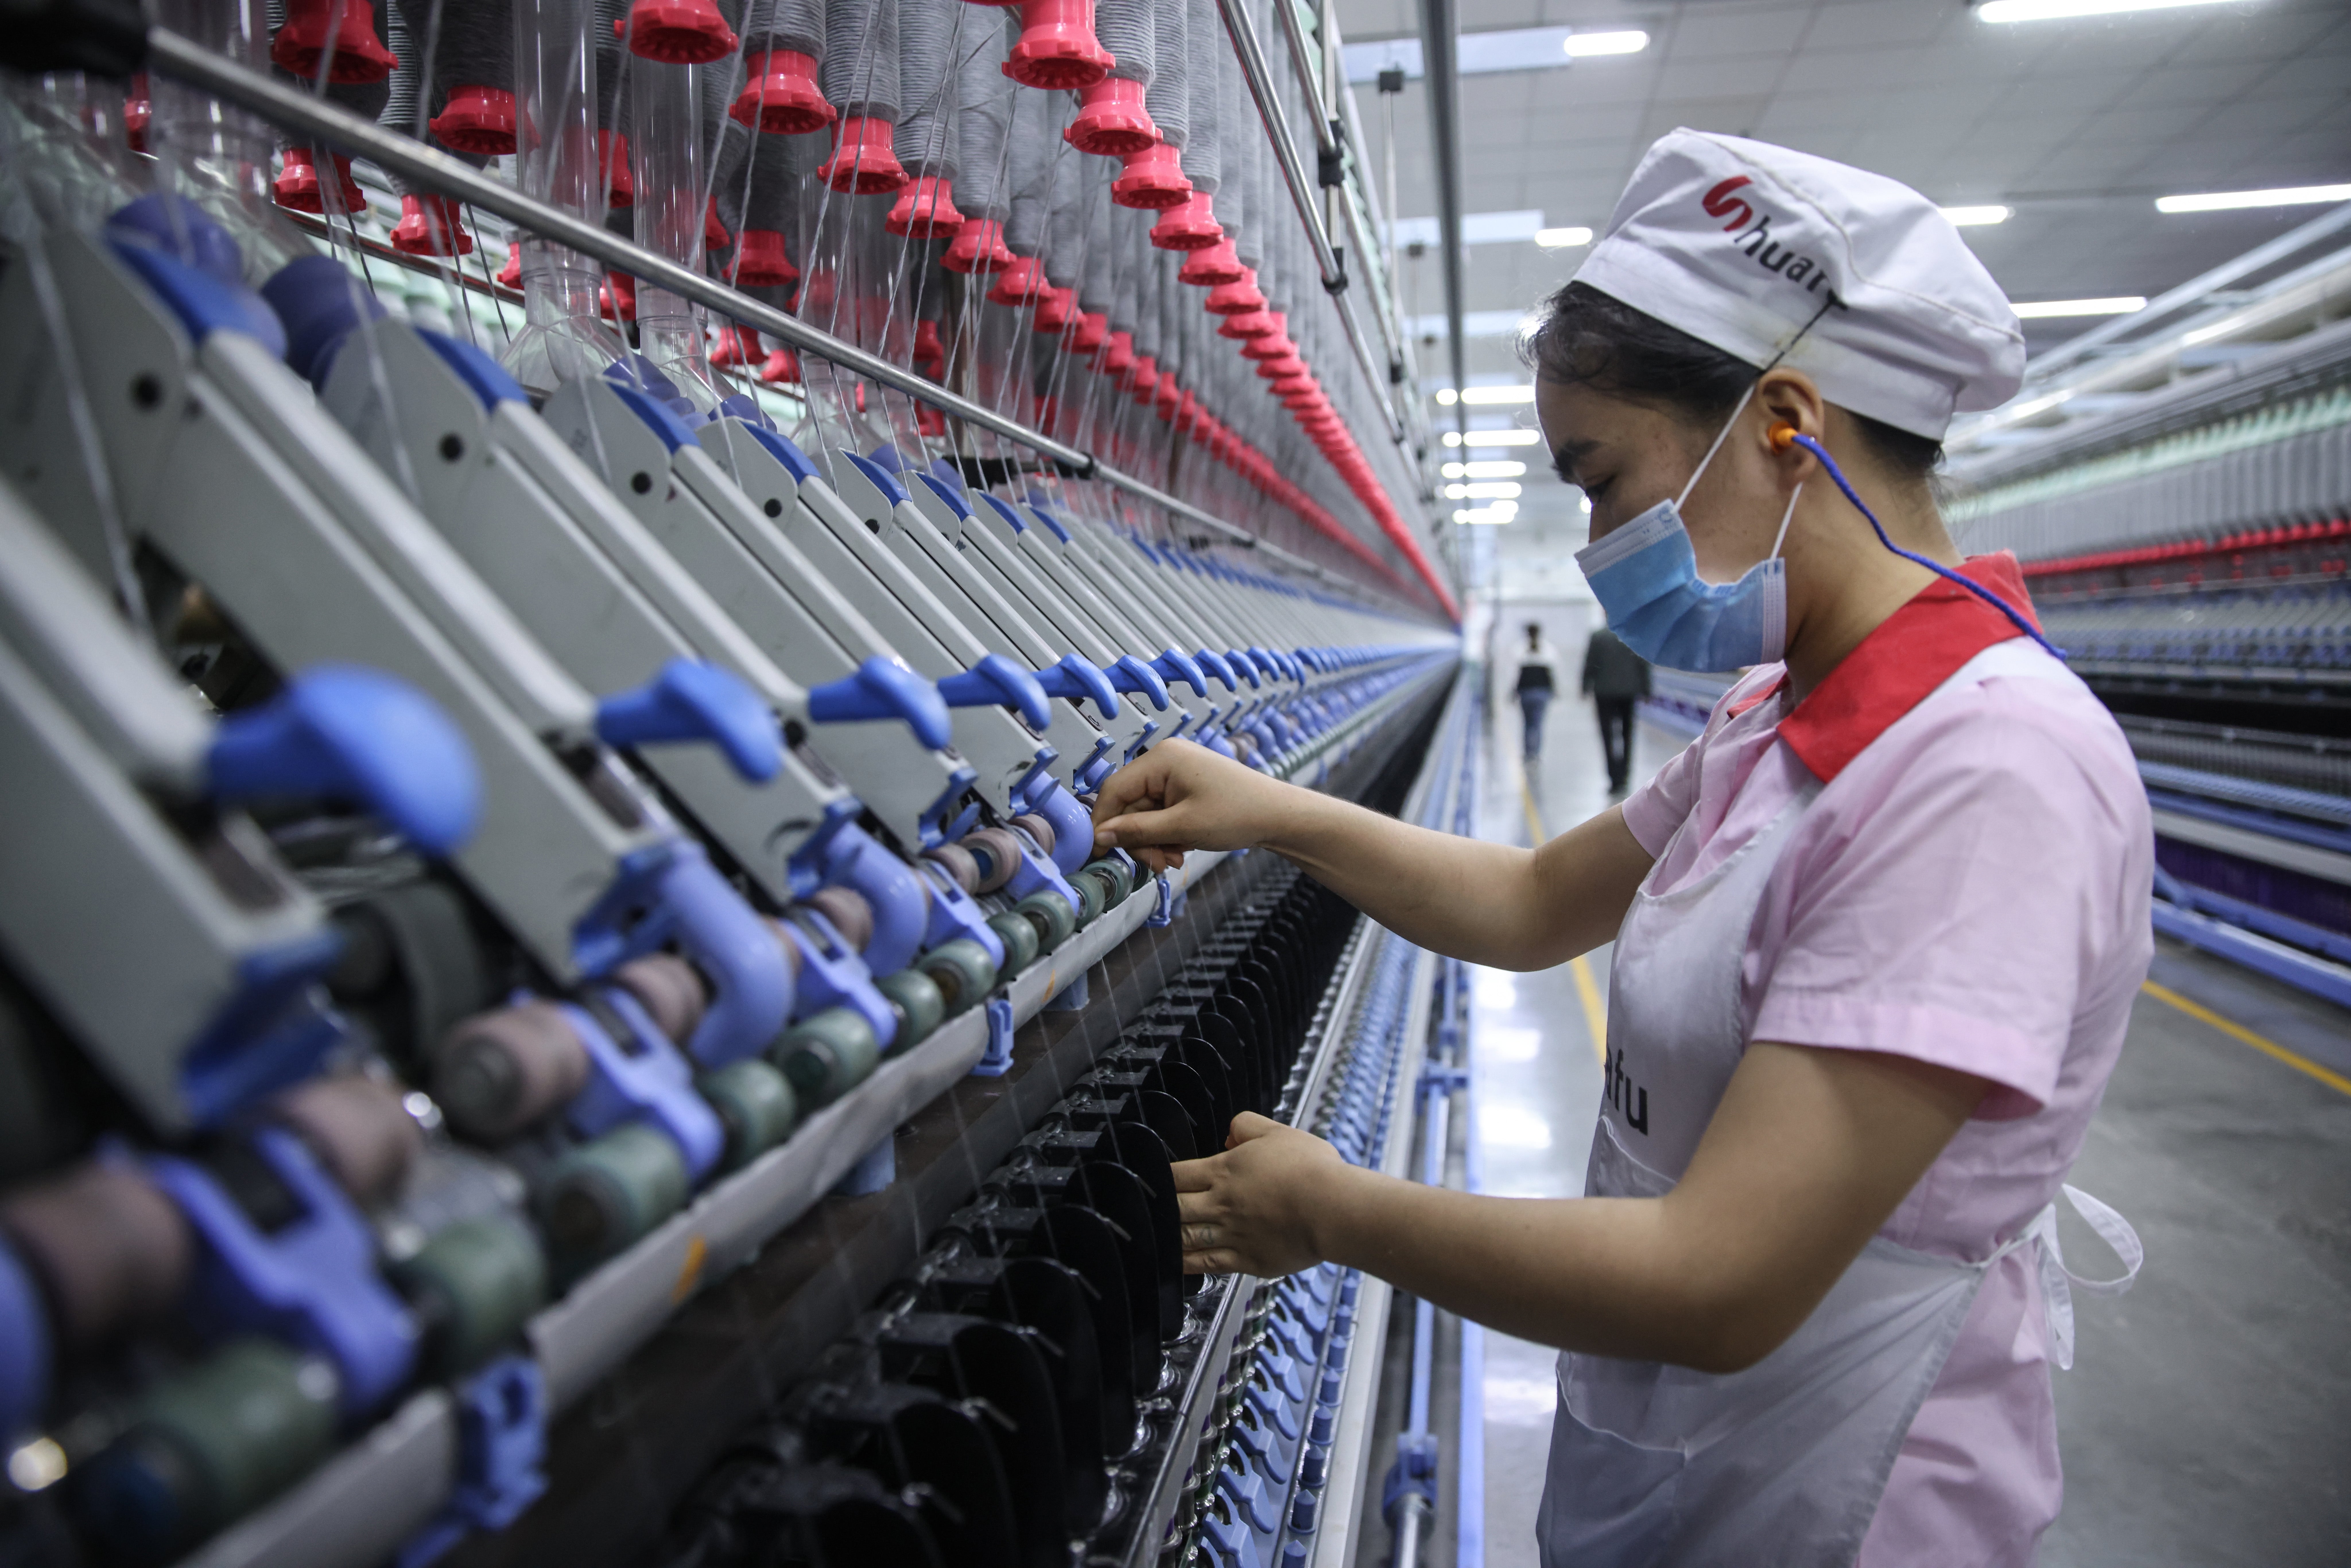 An ethnic minority worker operates cotton yarn machinery in a textile factory in Xinjiang, China